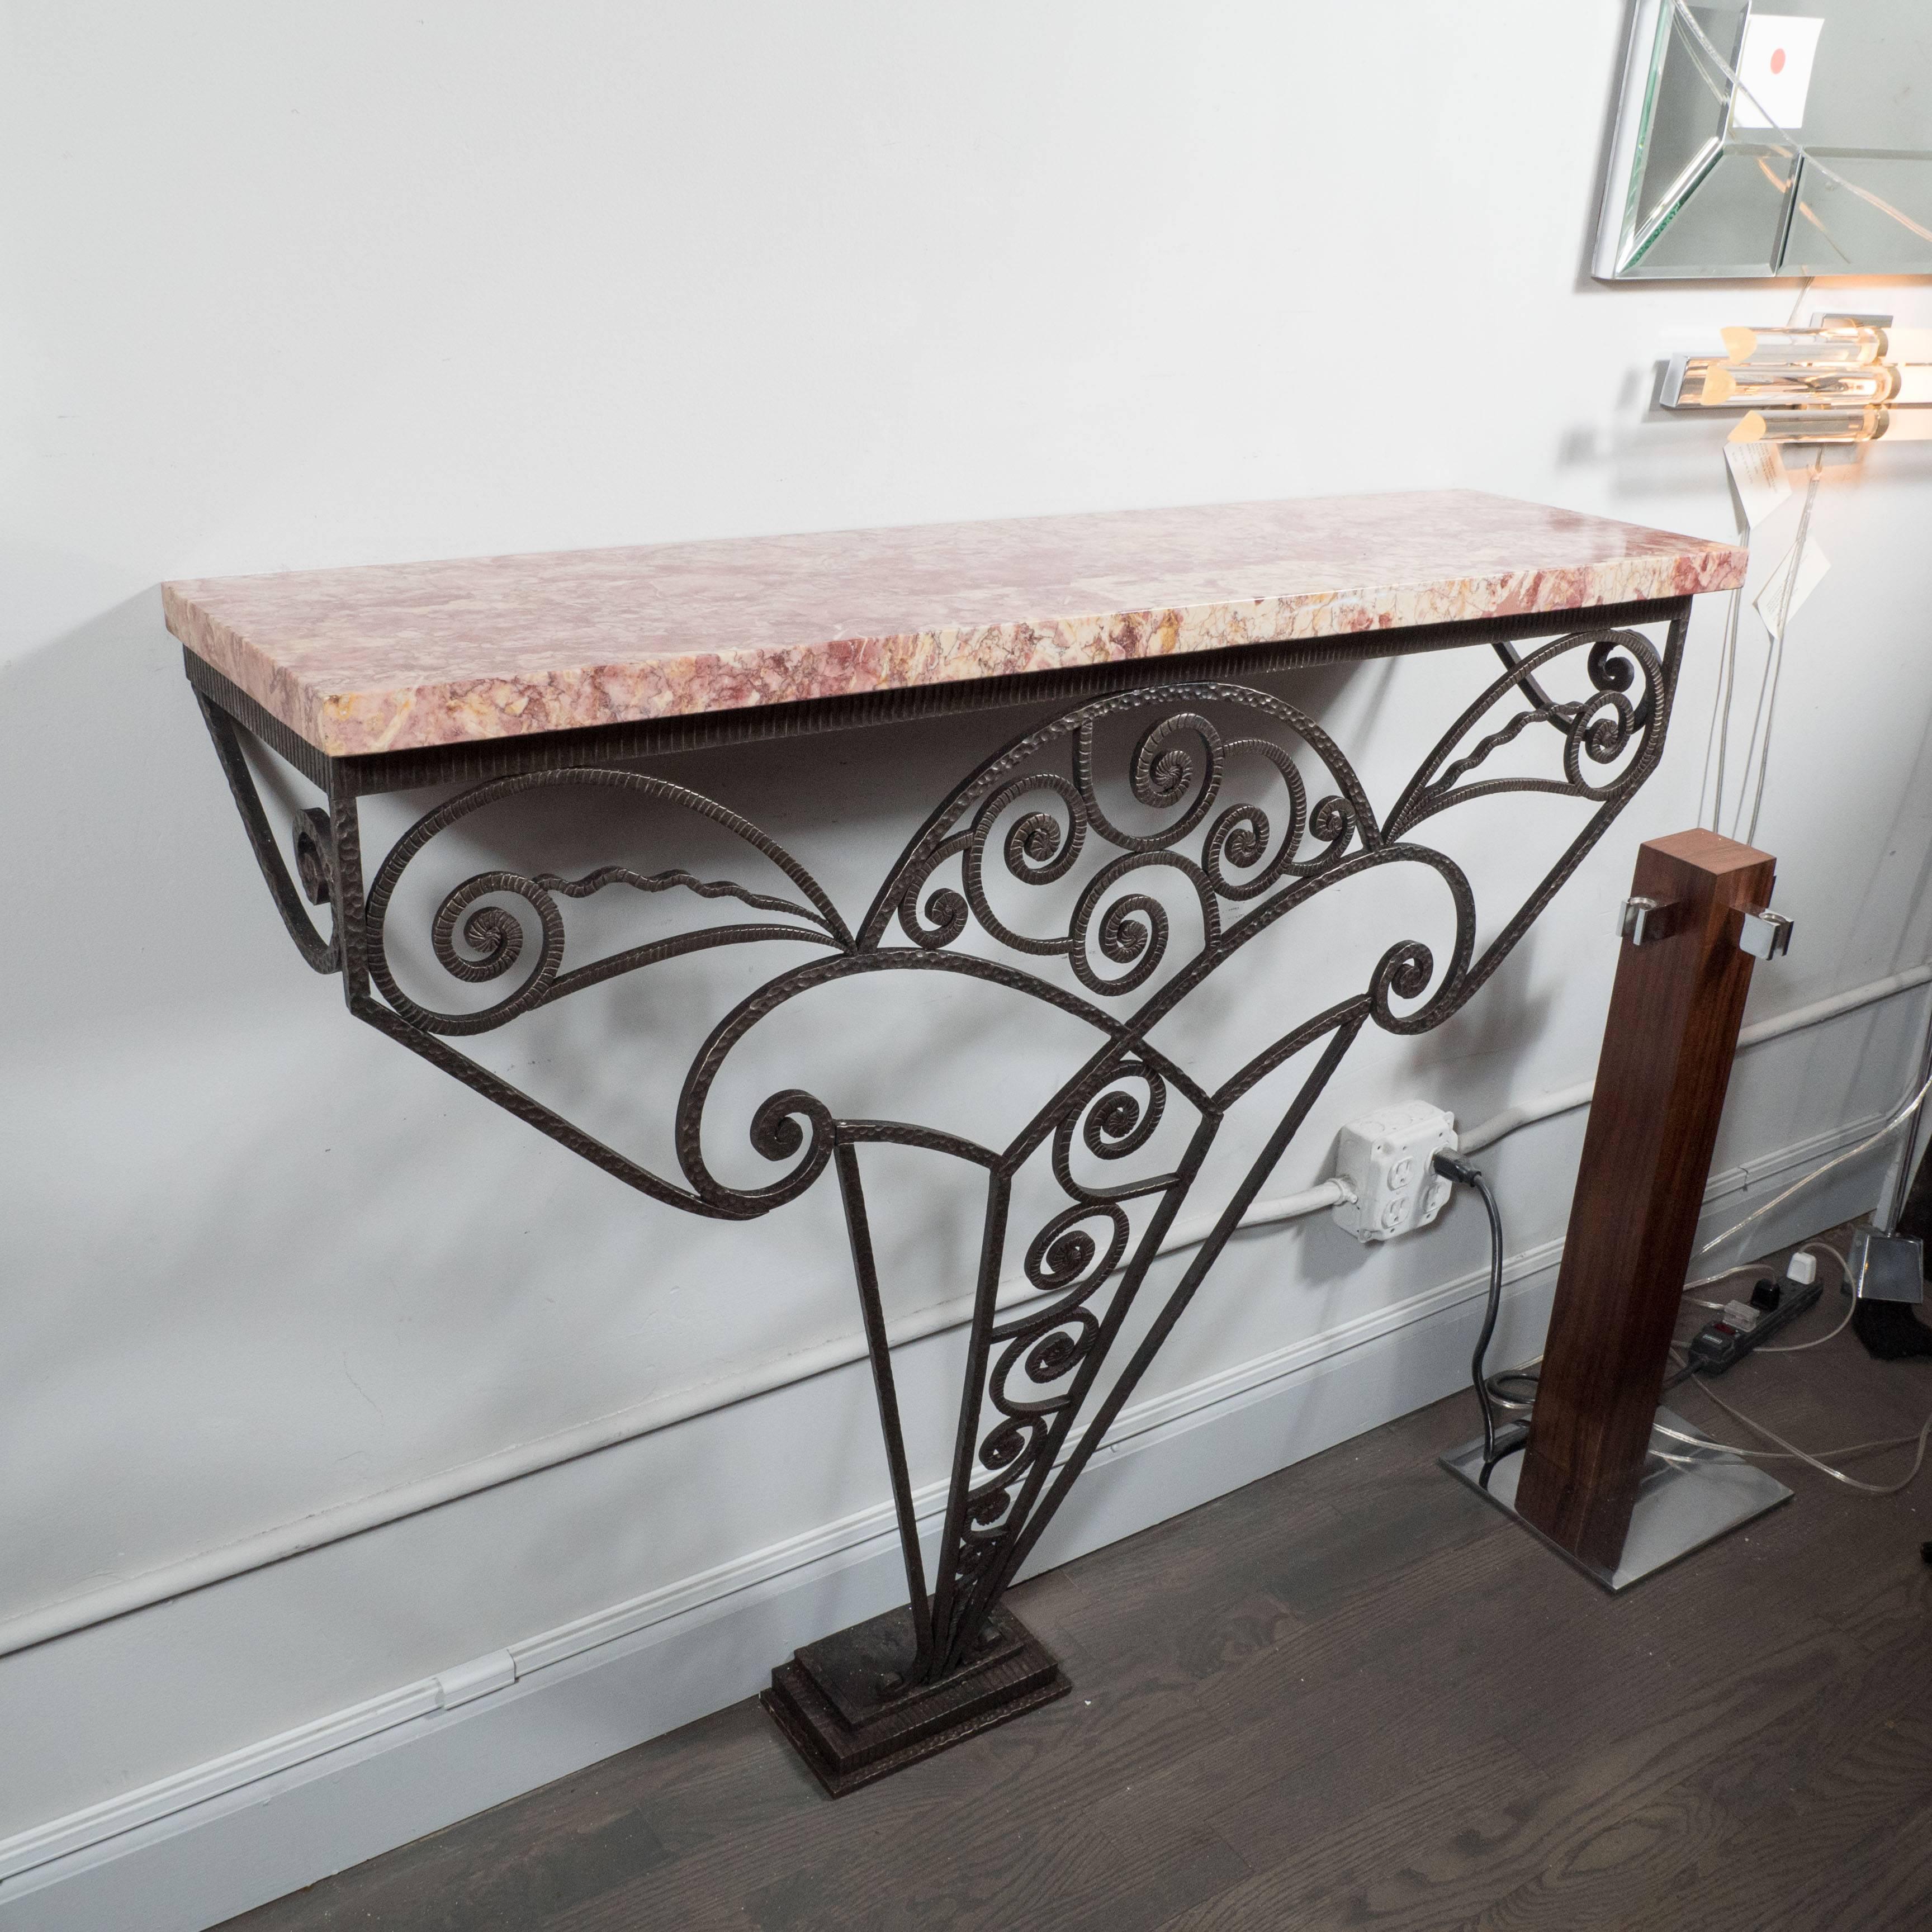 An Art Deco wall-mounted console in the manner of Edgar Brandt, the base on this console is an elaborate geometric amalgamation of wrought iron scrolls and arches branching out to support an exotic marble top in tones of fuchsia, rose and ivory. The